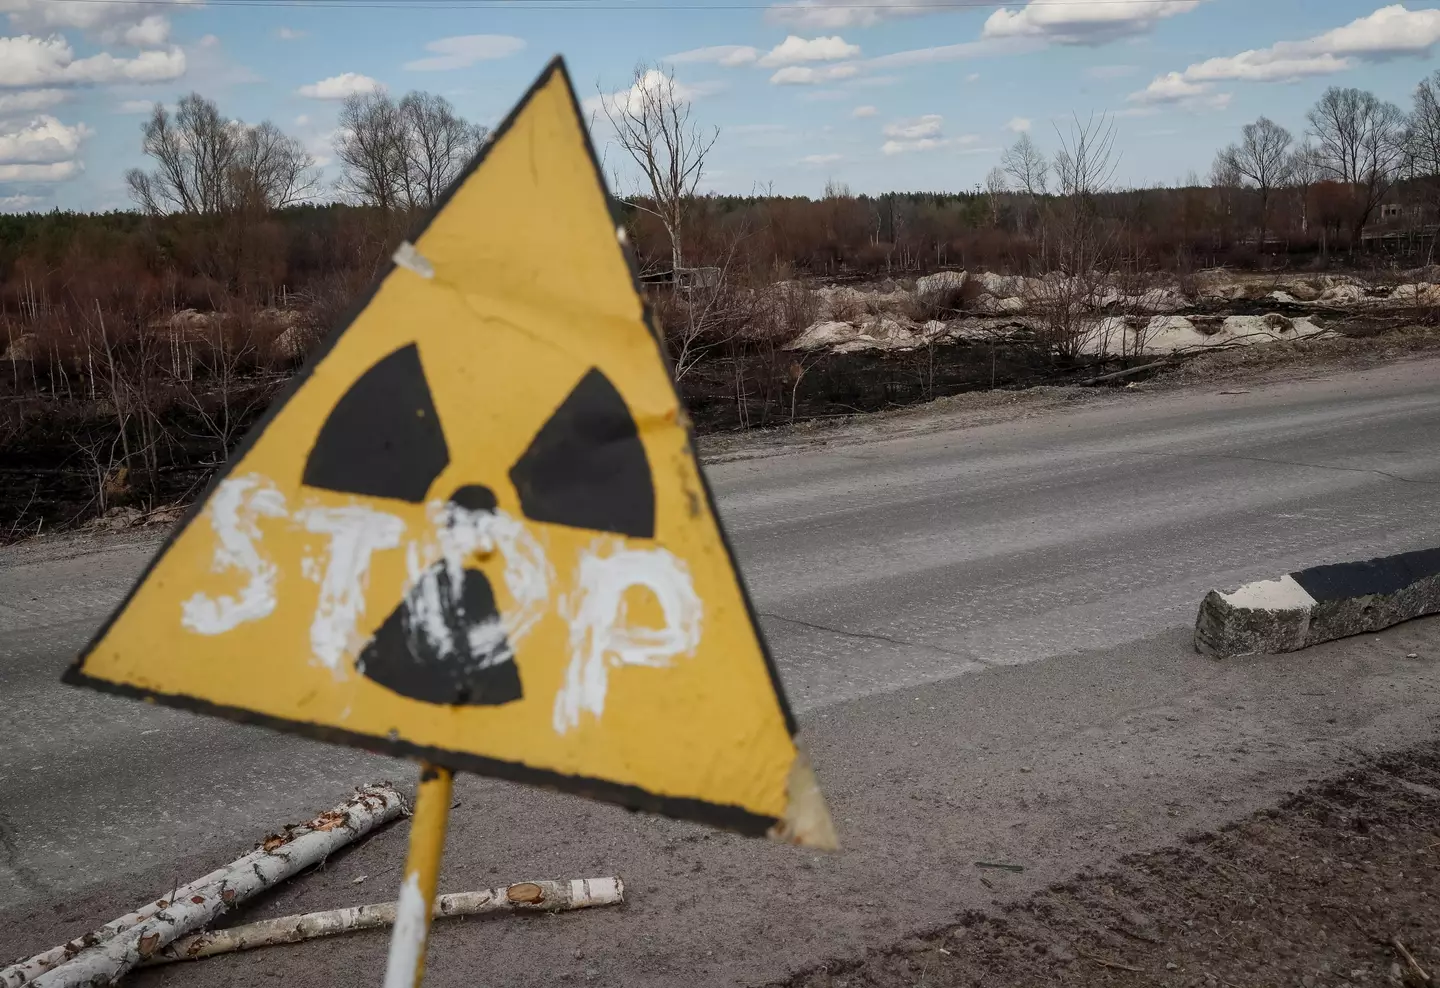 Russian troops have spread radioactive material in the plant.